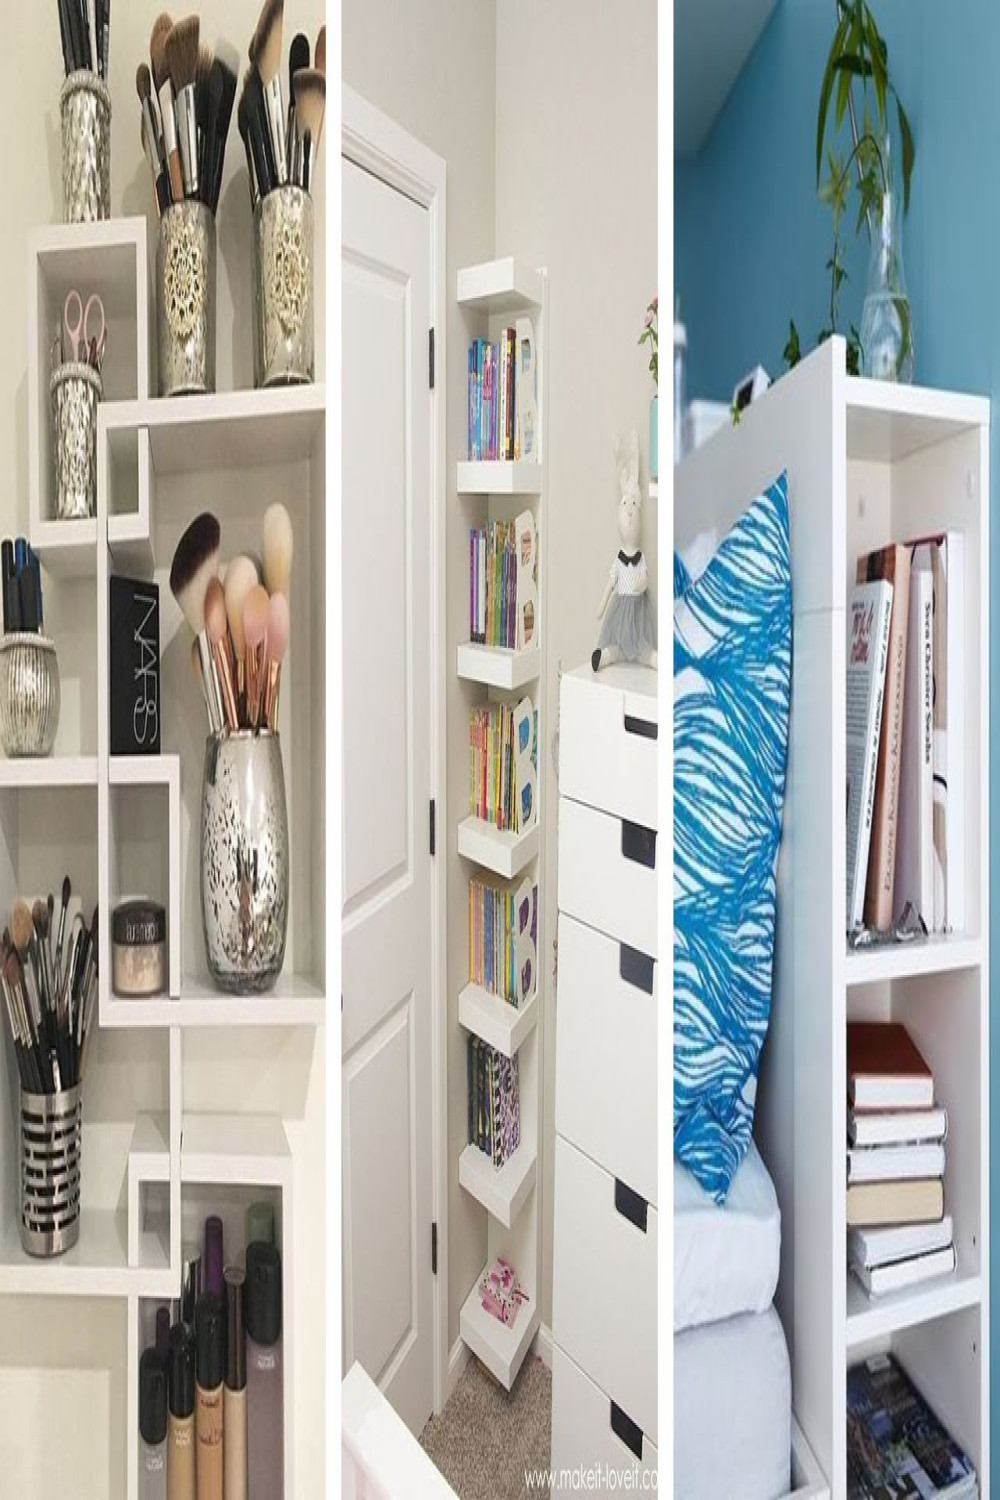 Super Cool Bedroom Storage Ideas That You Probably Never Considered